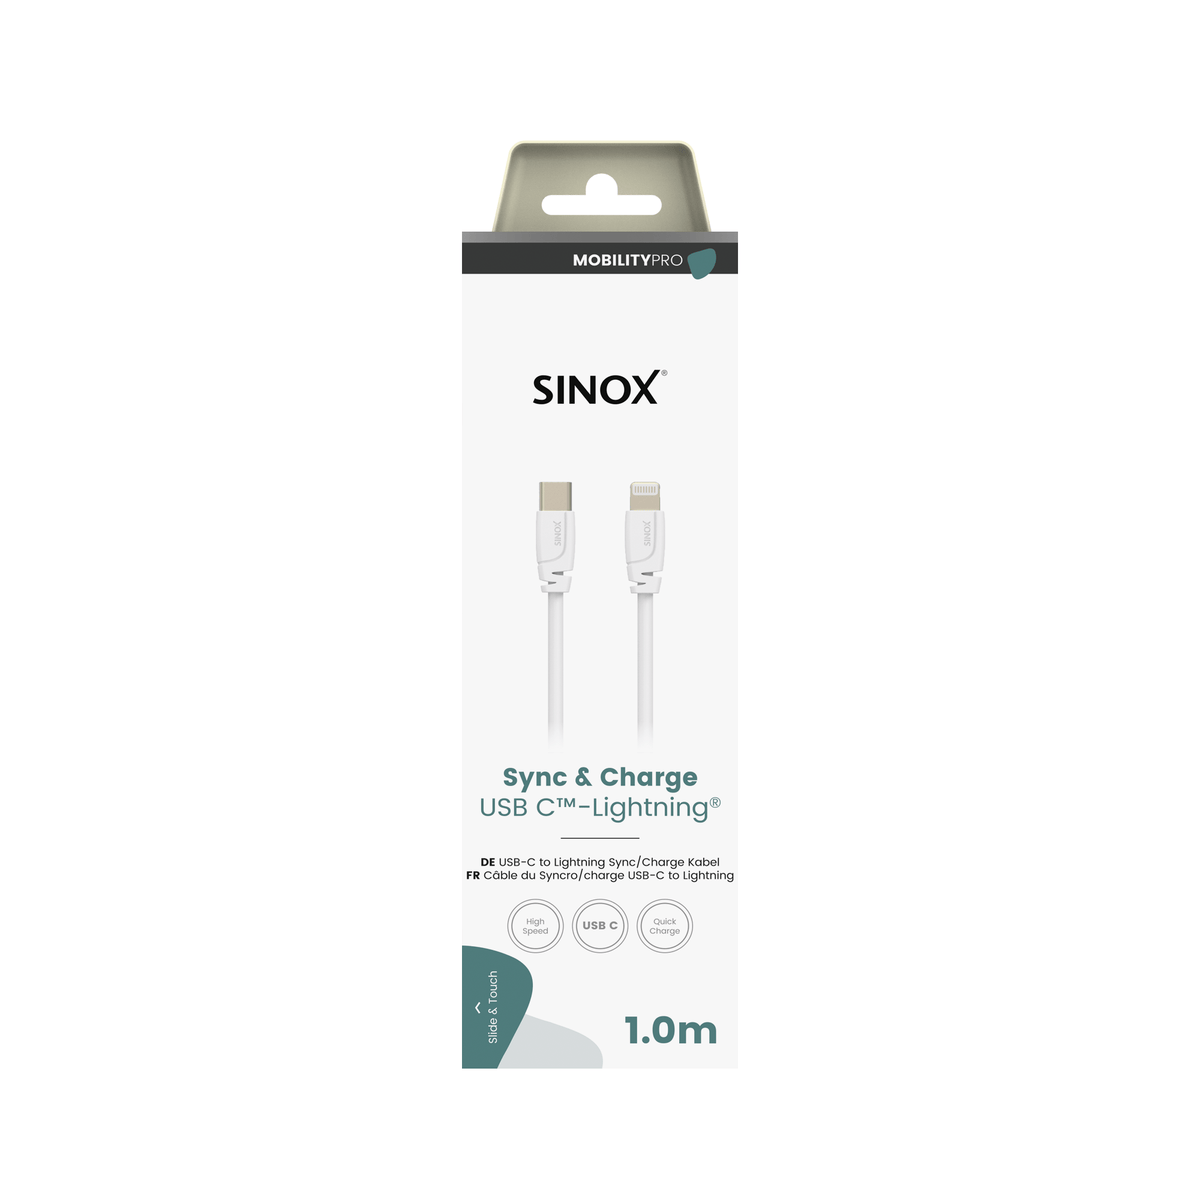 Sinox Mobility Pro USB 2.0 Type C Lightning Cable - White | 51187 from Sinox - DID Electrical